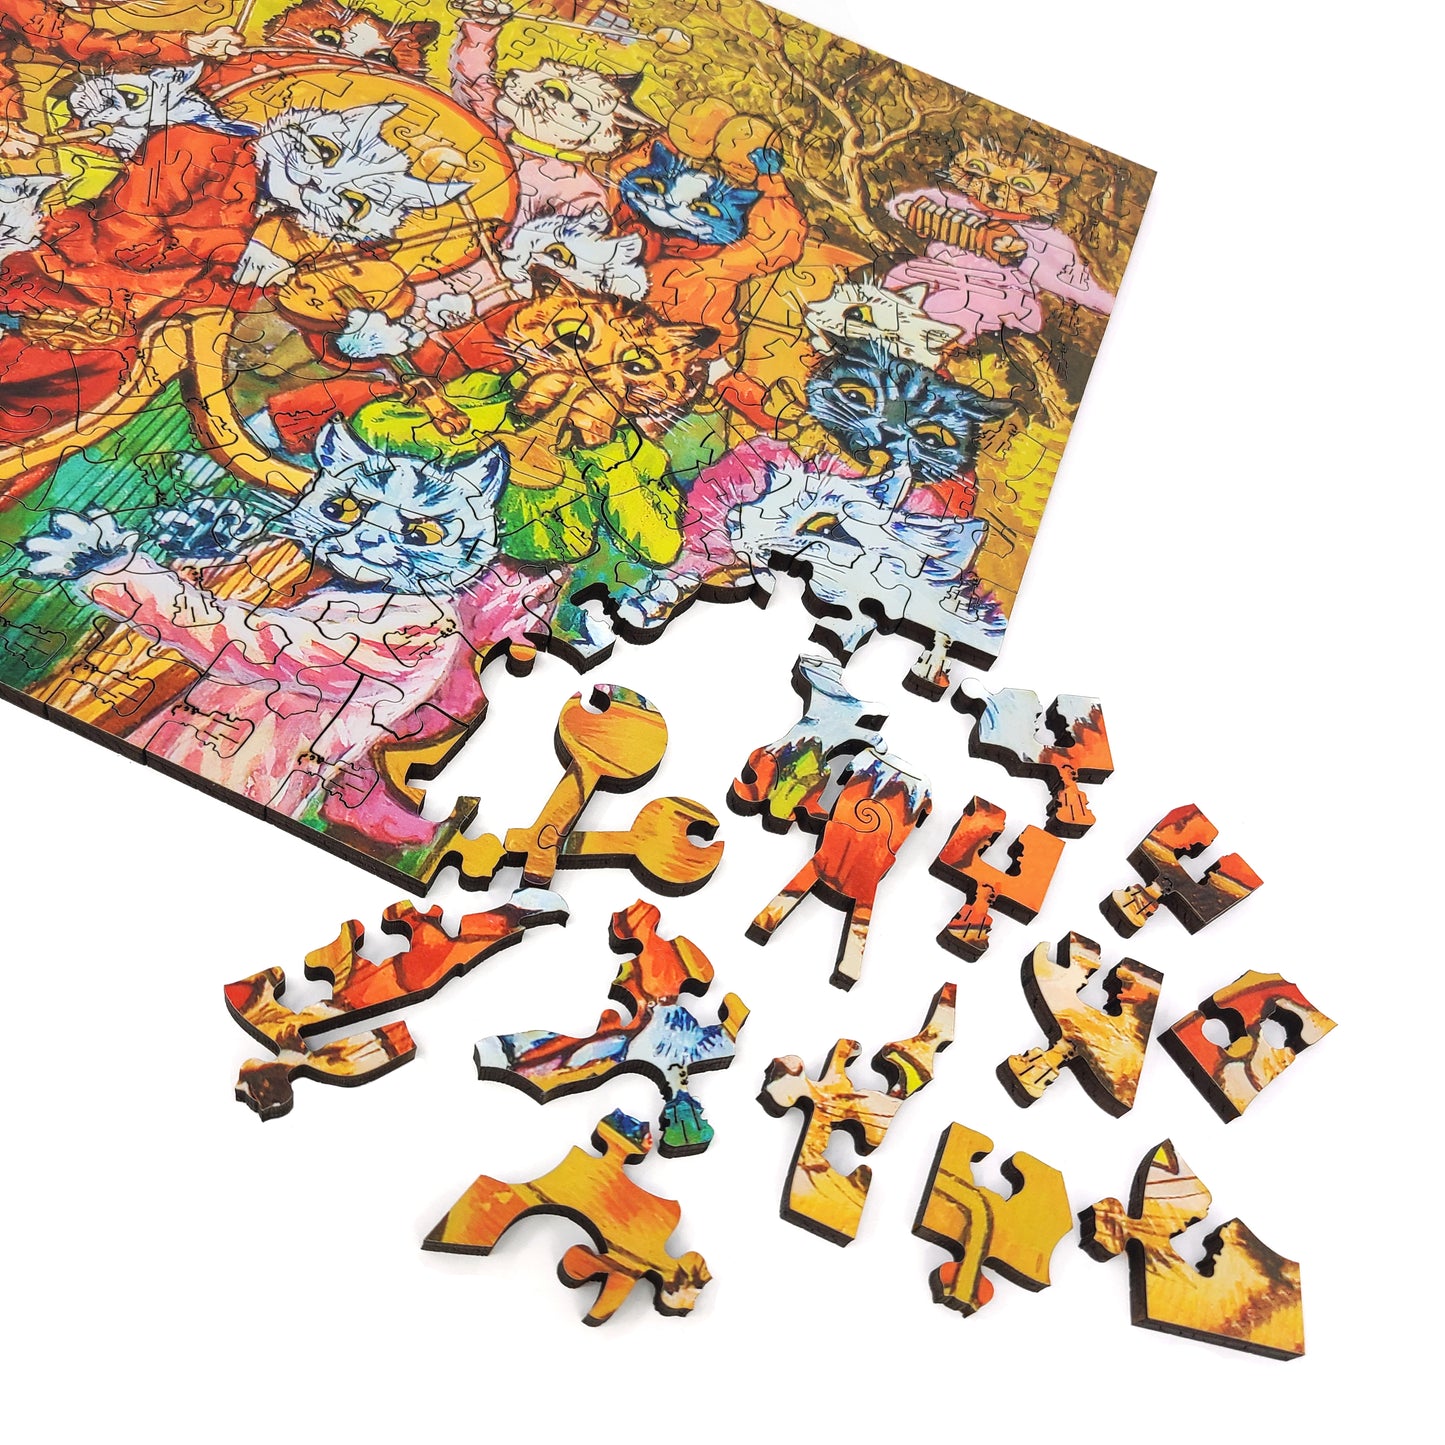 Large Format Wooden Jigsaw Puzzle with Uniquely Shaped Pieces for Seniors and Adults - 235 Pieces - And the band plays on